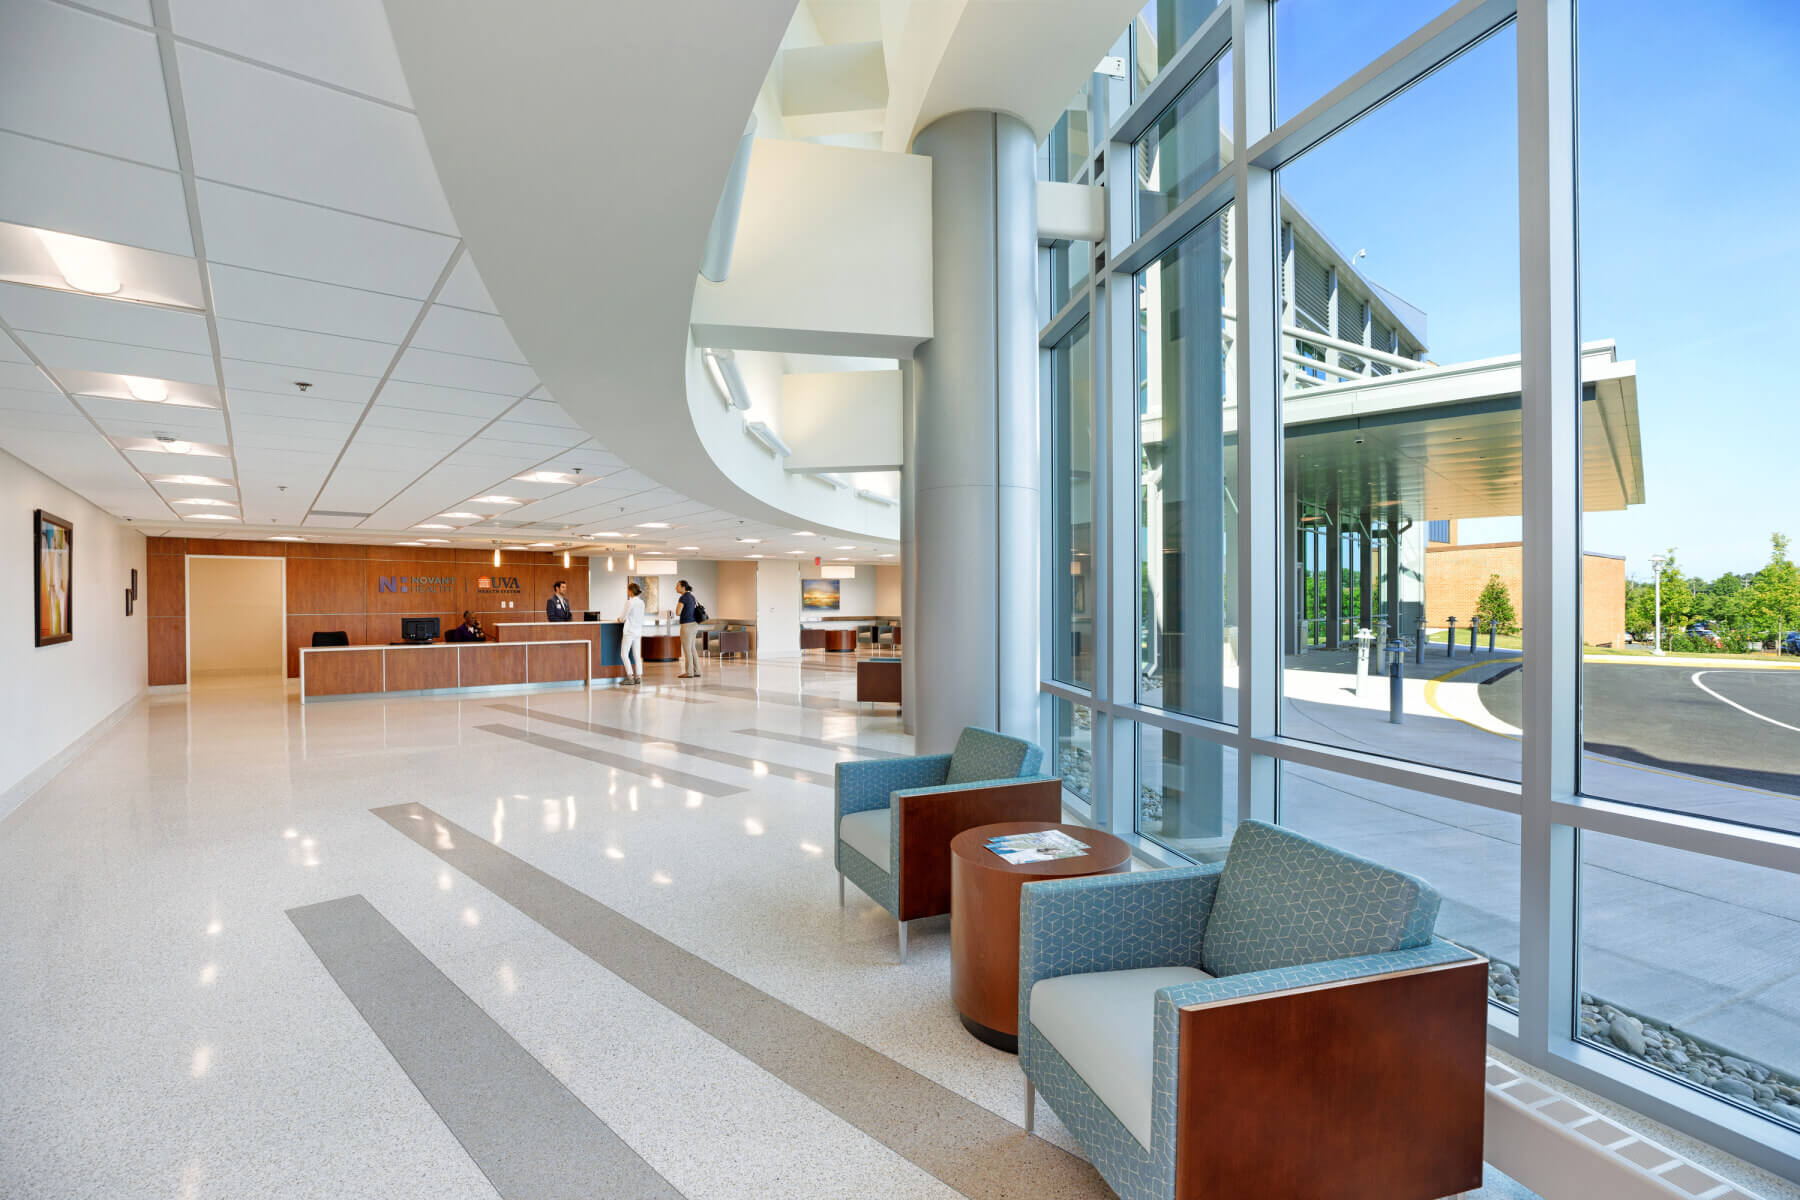 the building’s main lobby and reception desk